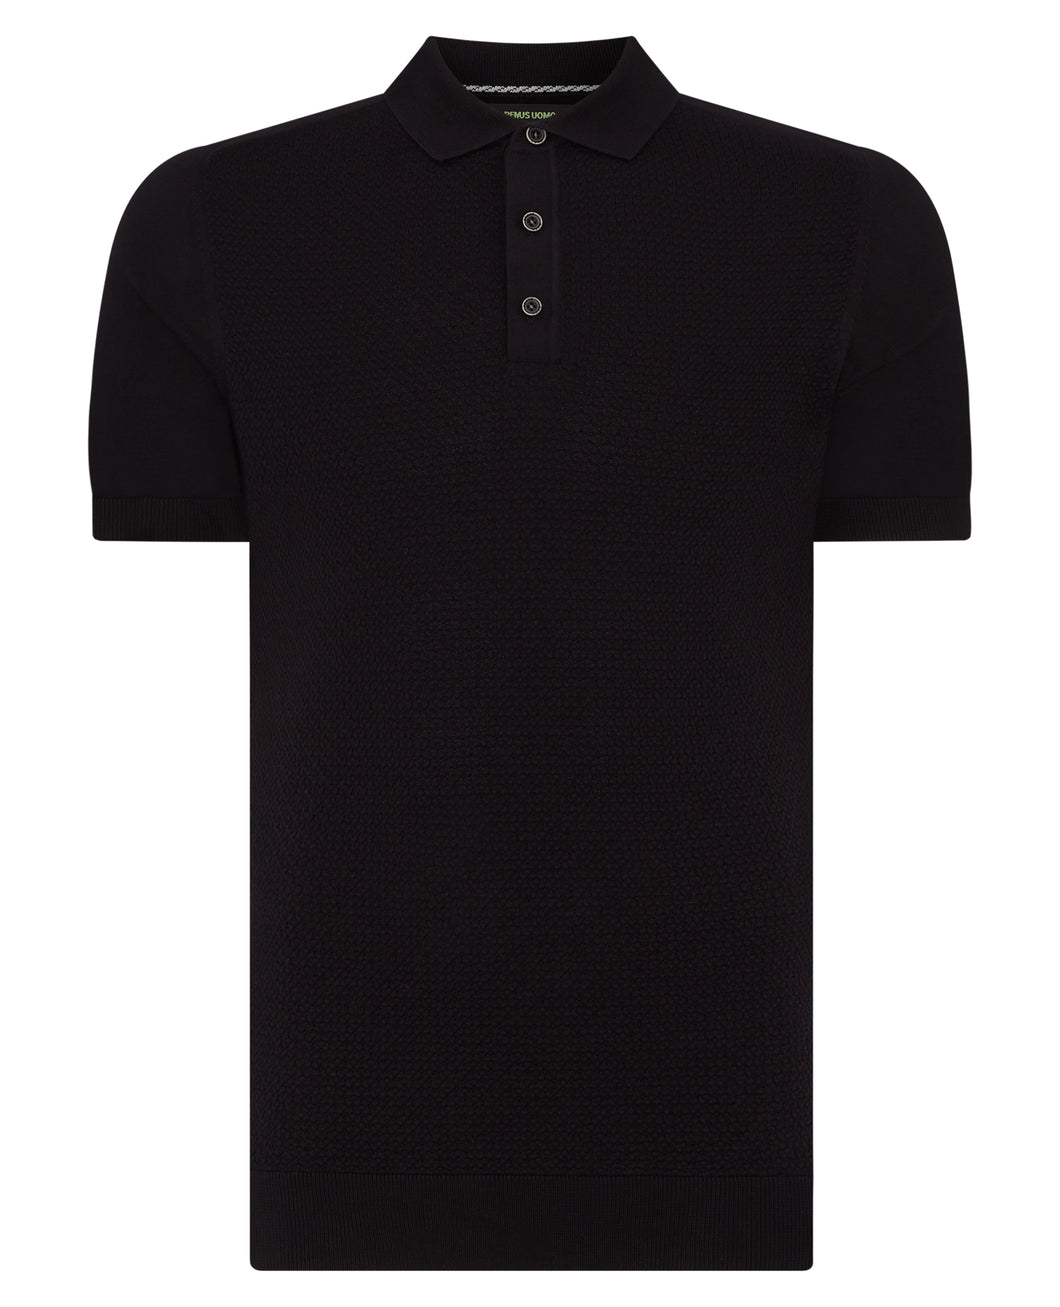 REMUS UOMO Short Sleeve Knitted Polo Shirt 3-58679